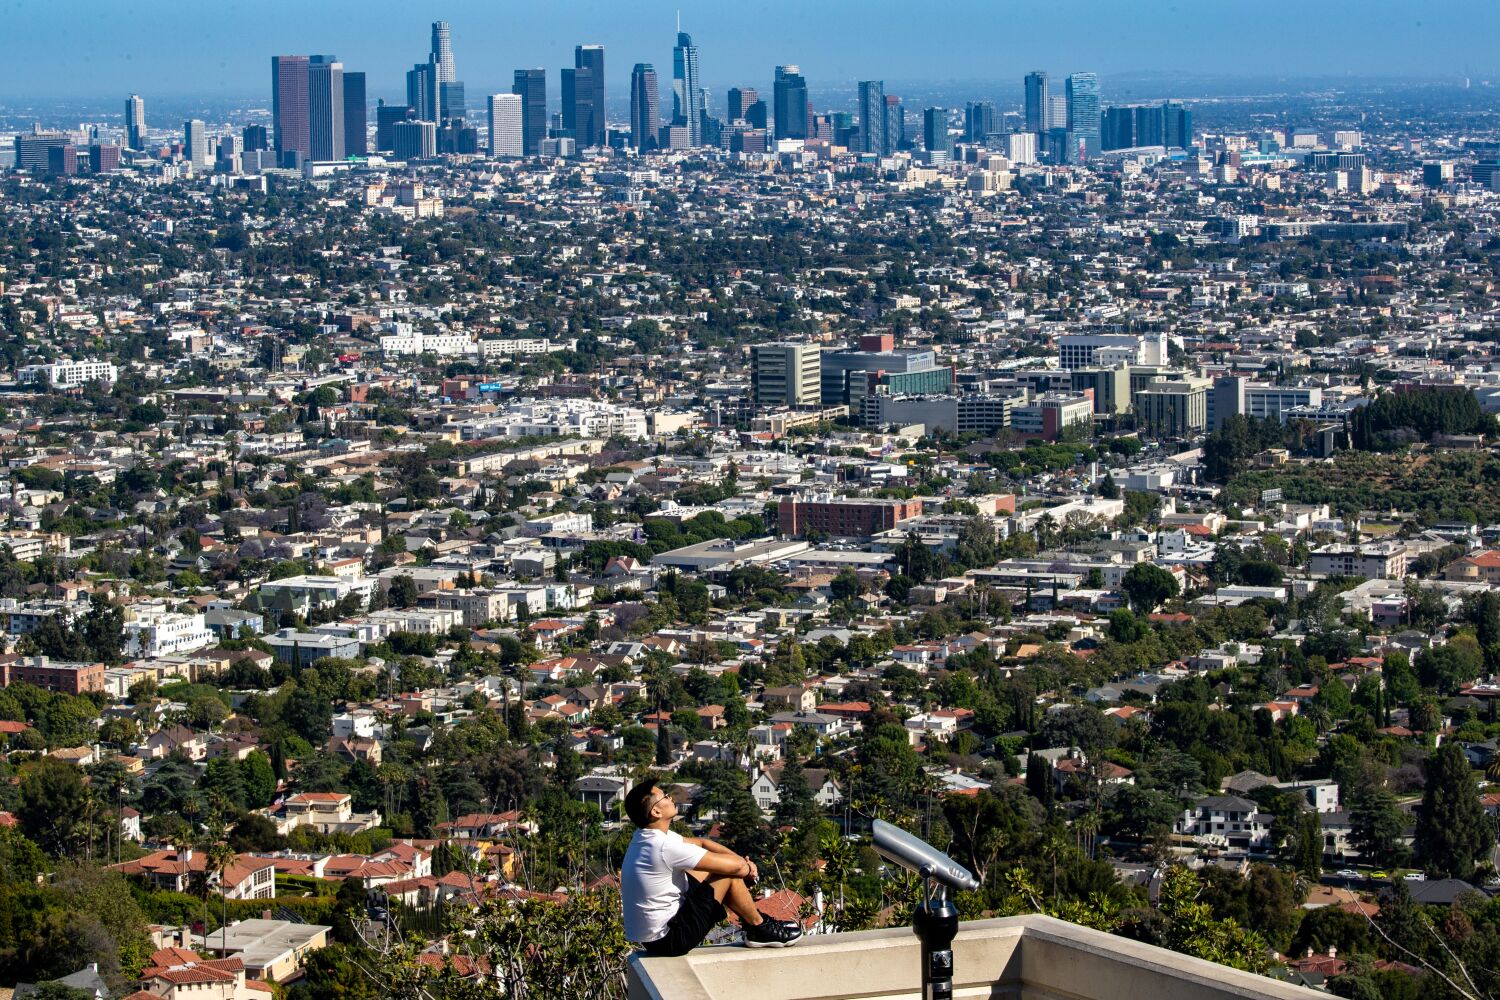 Opinion: The LA housing crisis could benefit from this